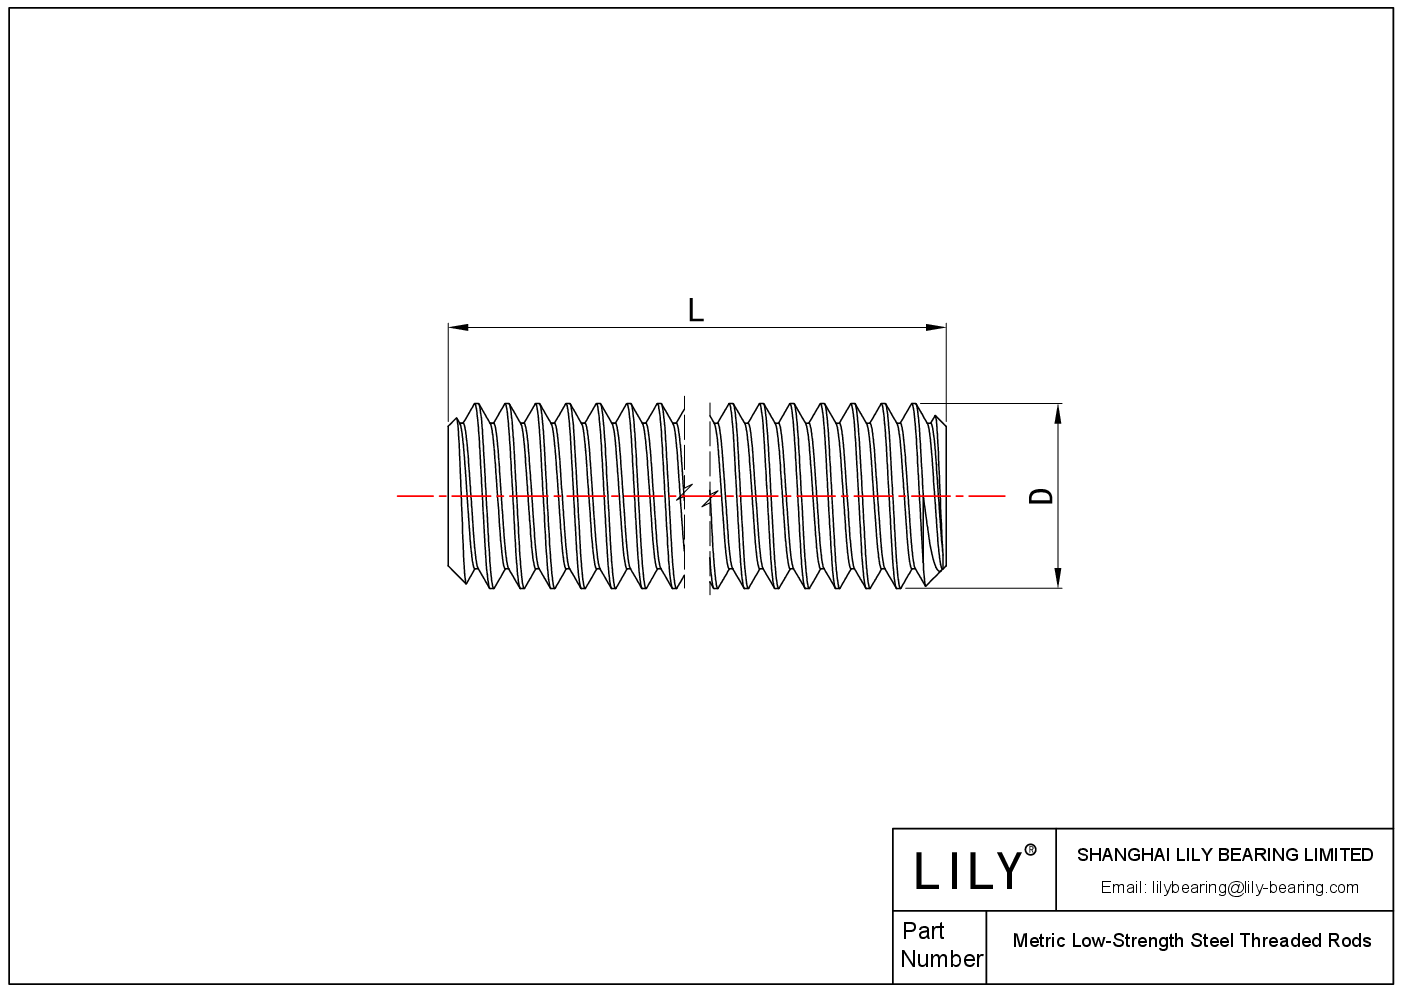 JEFJFACEC Metric Low-Strength Steel Threaded Rods cad drawing